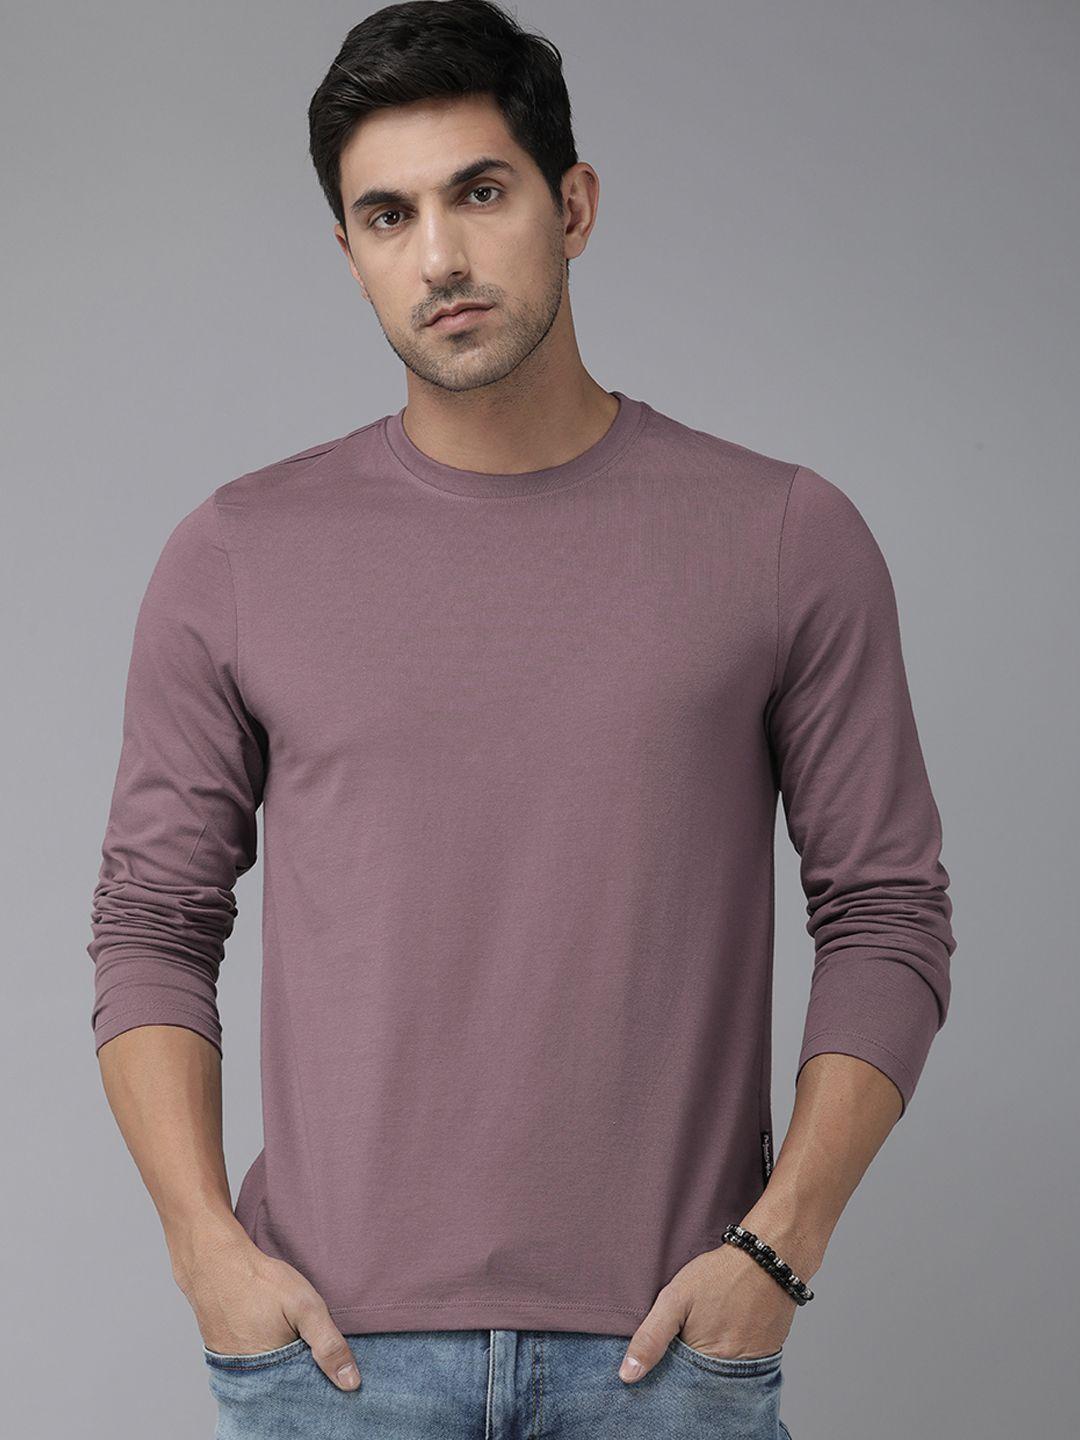 the roadster lifestyle co. men pure cotton solid long sleeves t-shirt